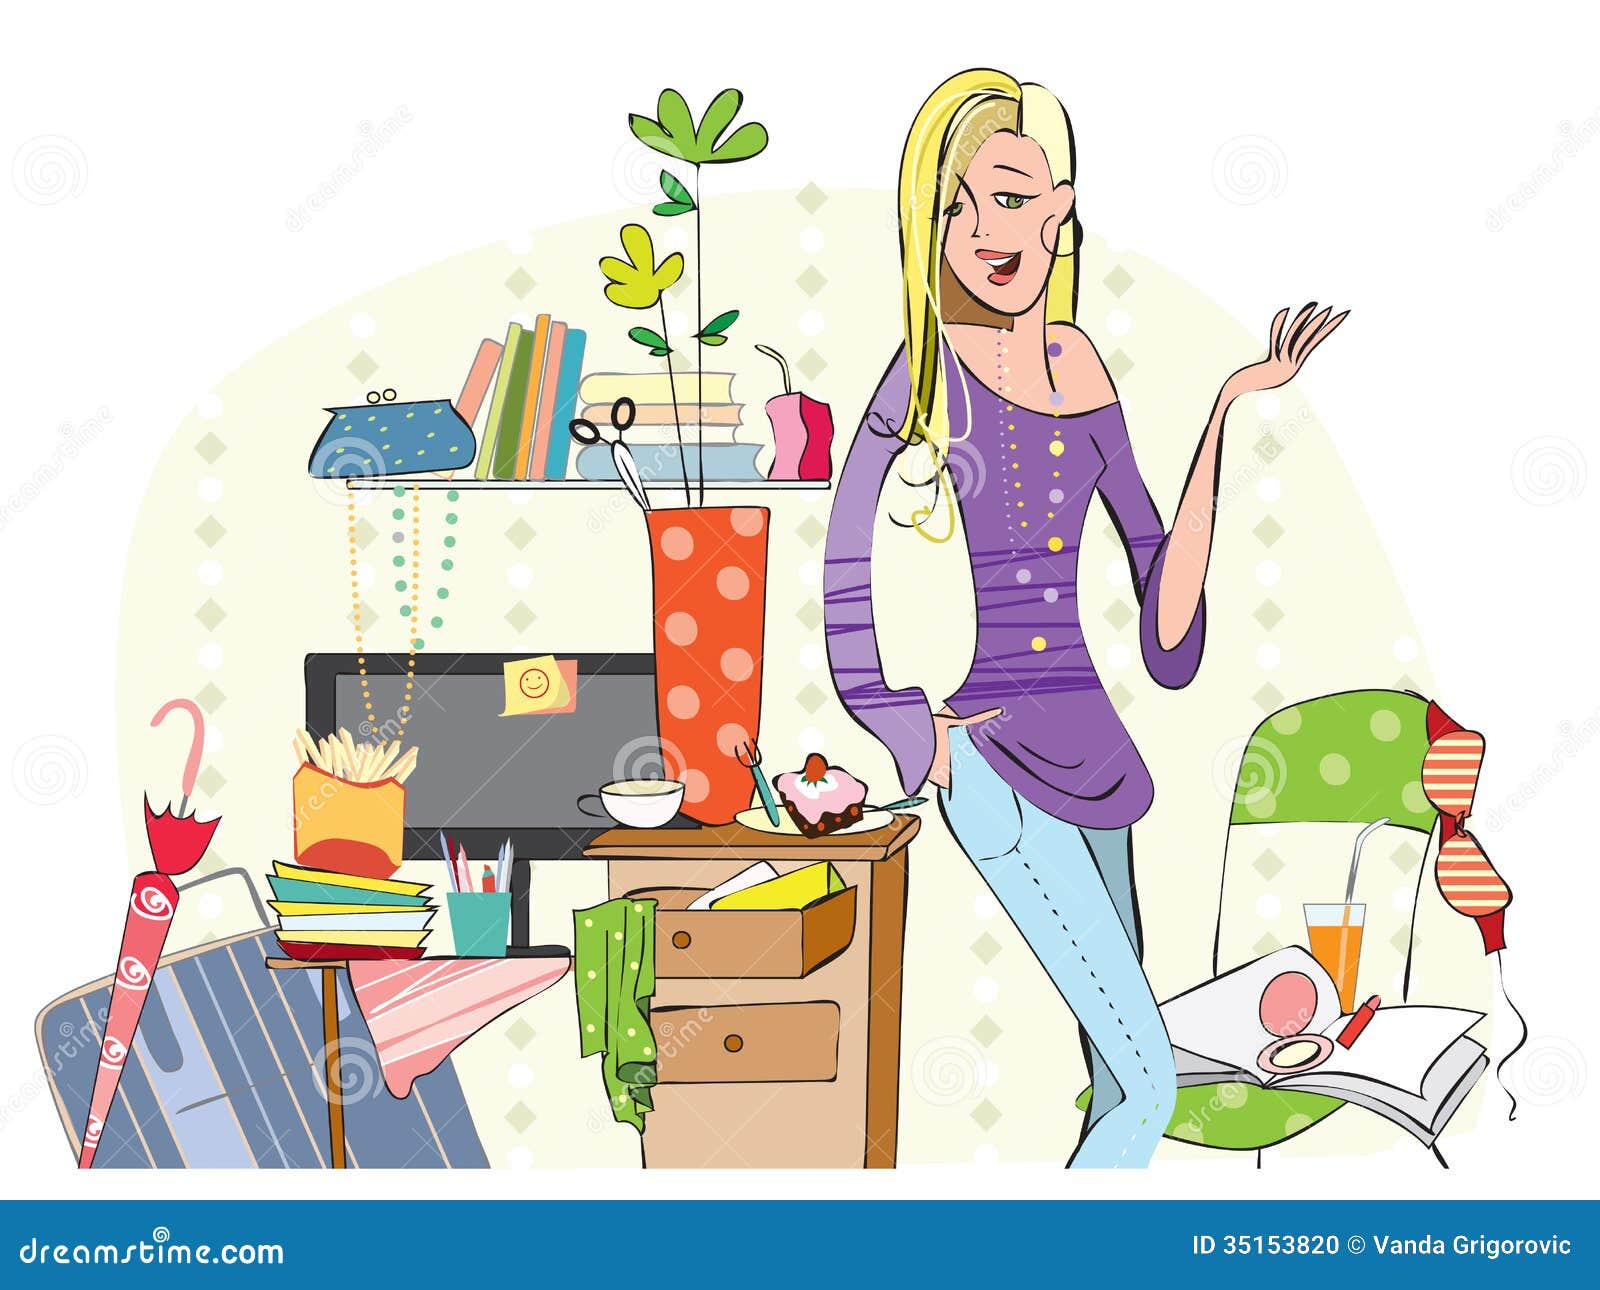 dirty room clipart - photo #23